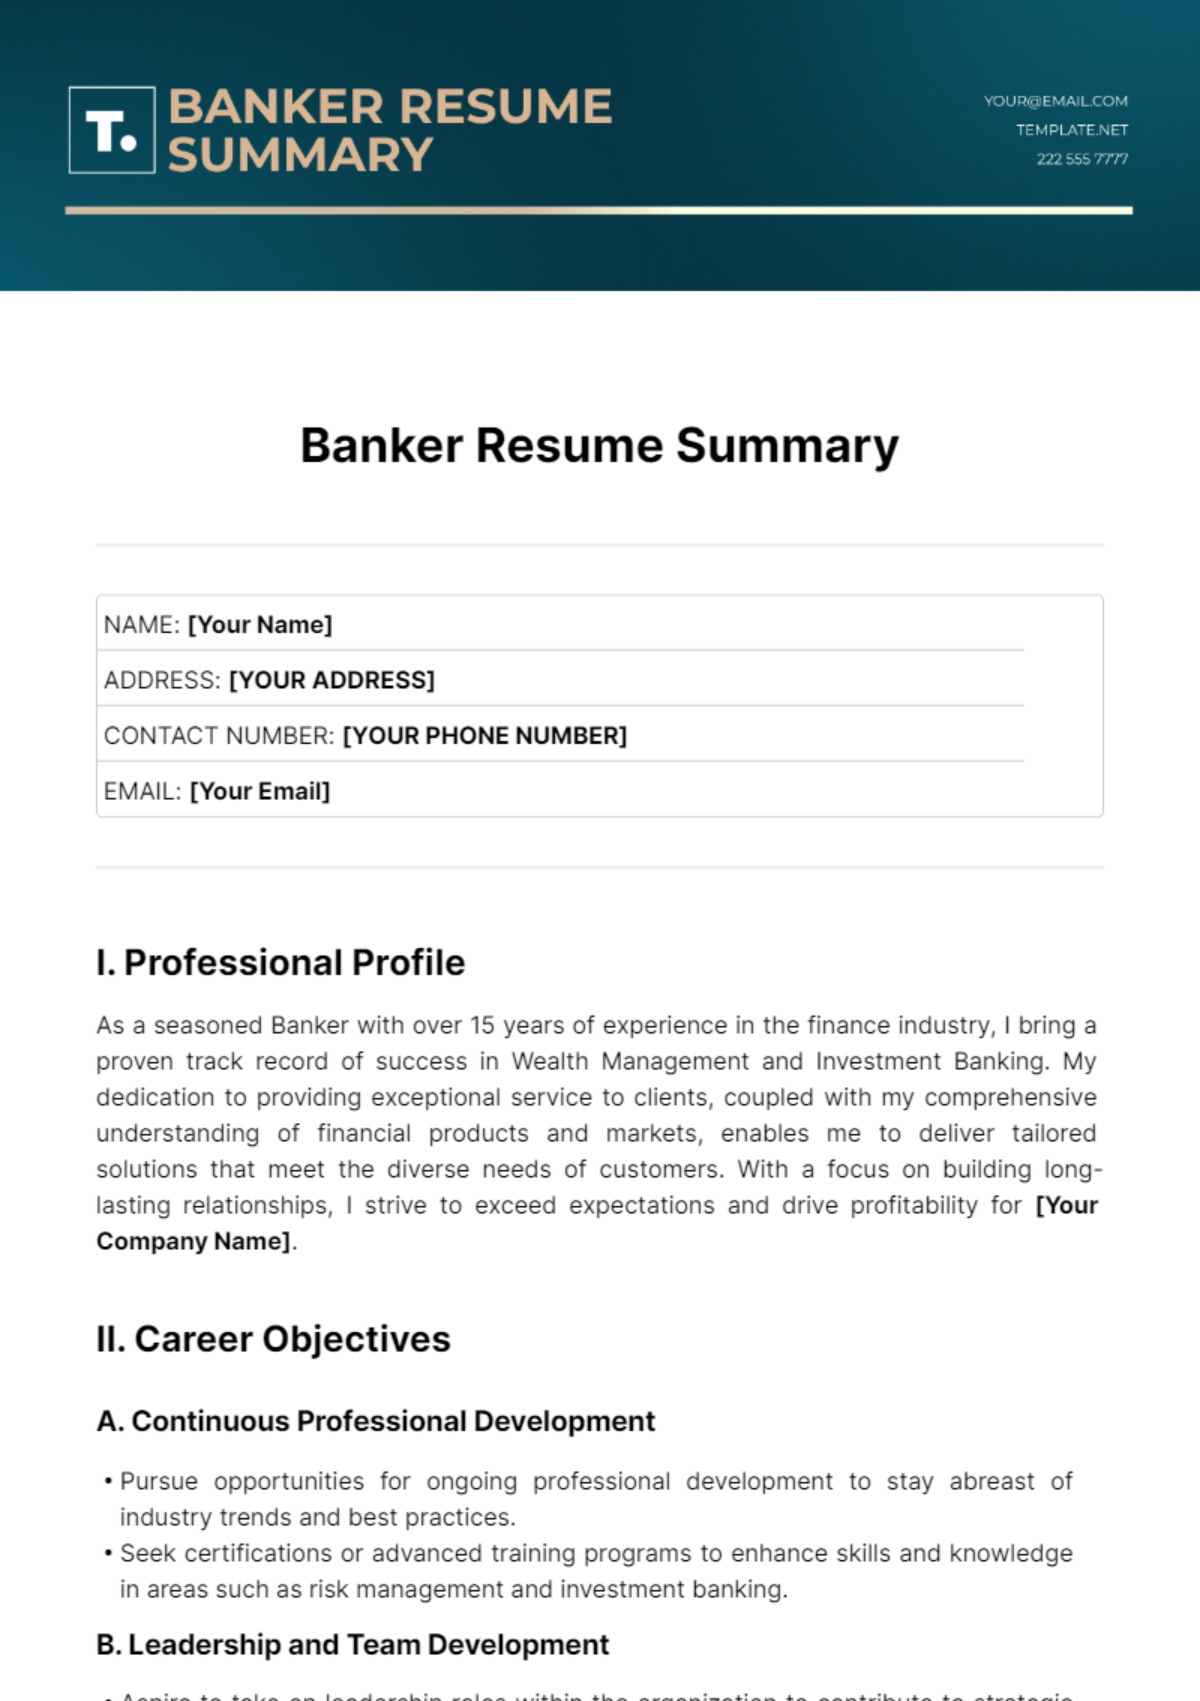 Free Banker Resume Summary Template